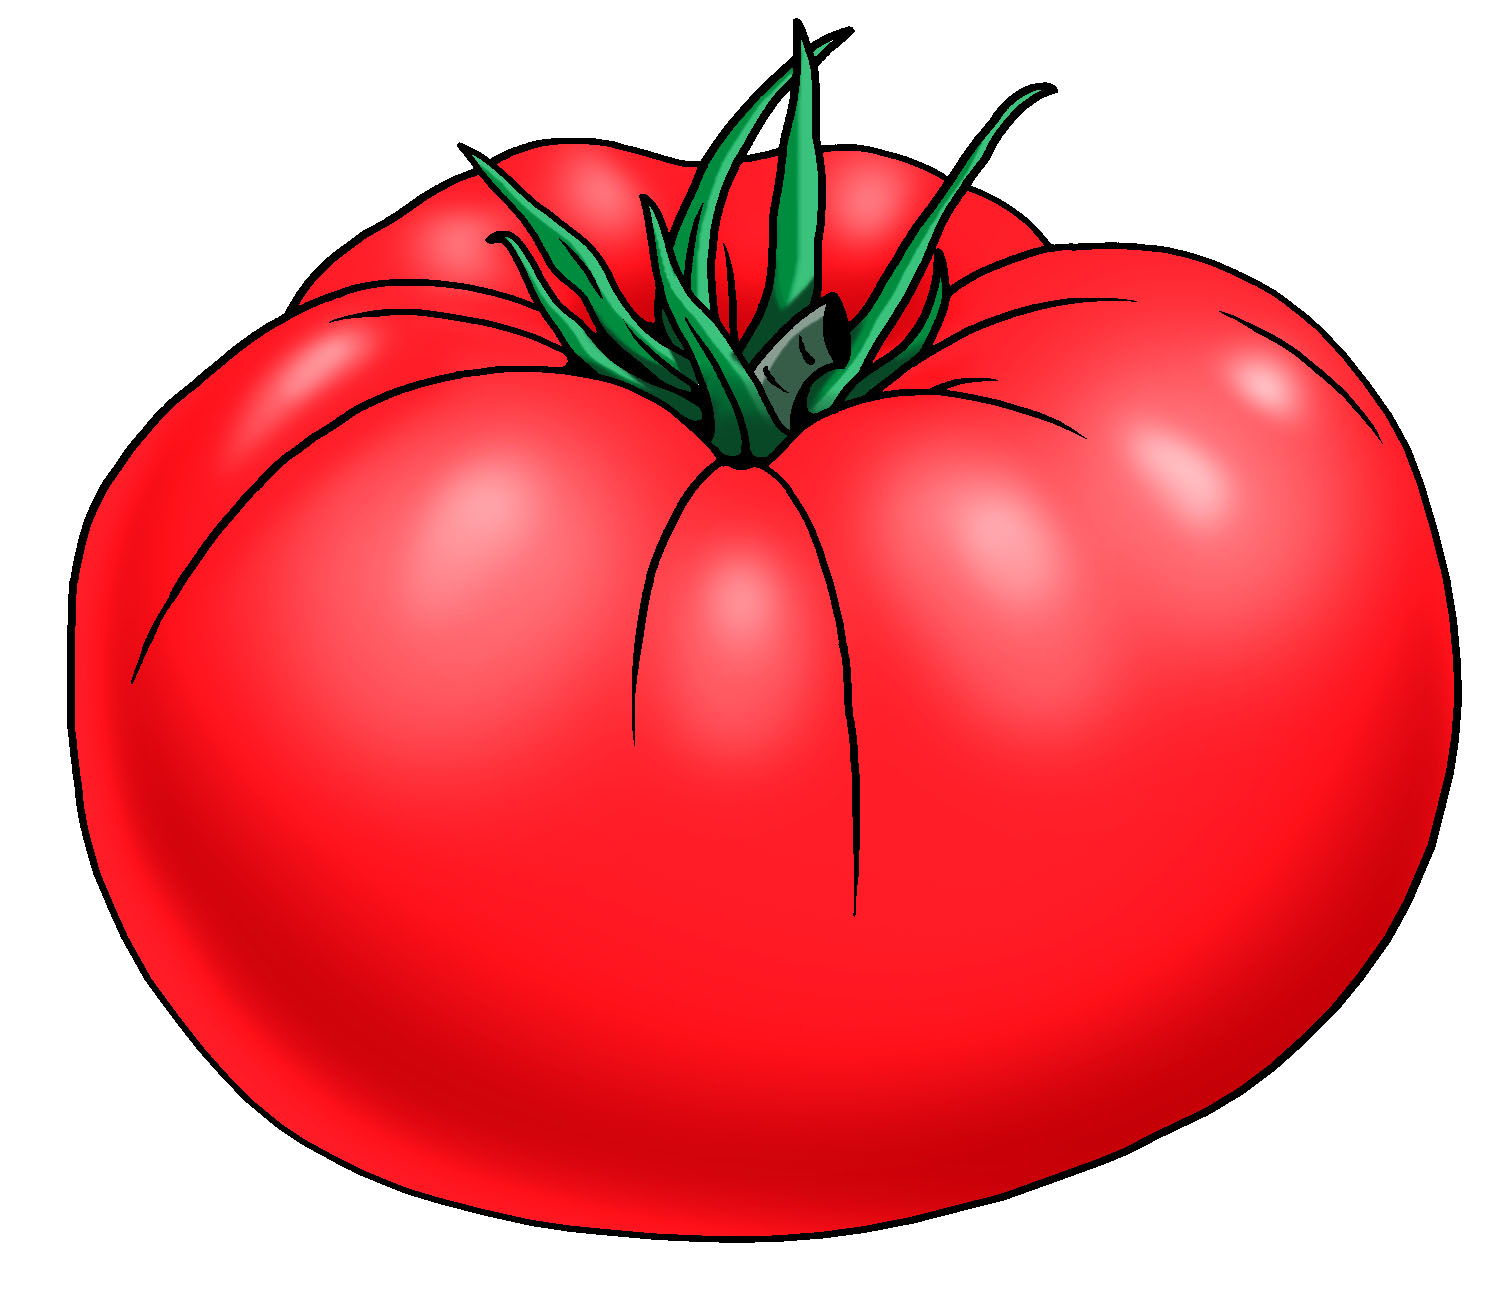 Tomato clipart drawing illustration sketch picture